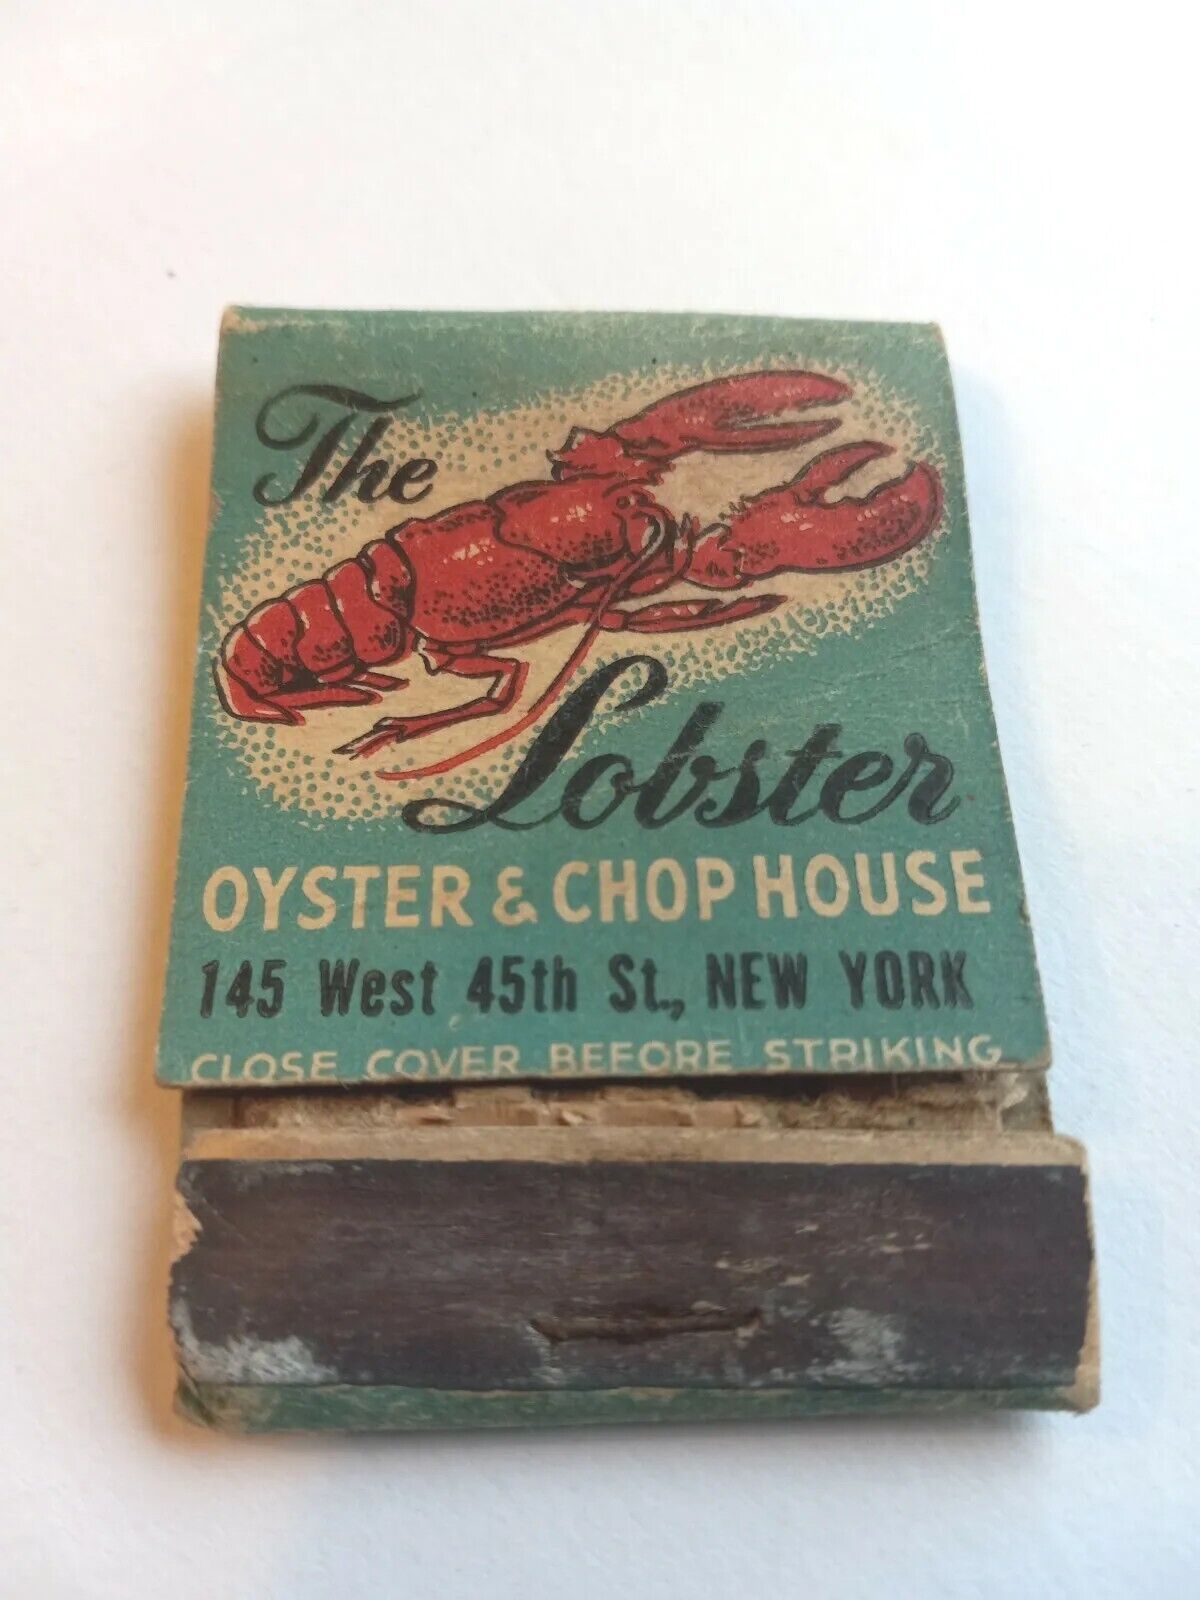 The Lobster Oyster Chop House 145 West 45th St Nyc Theatre District Matchbook